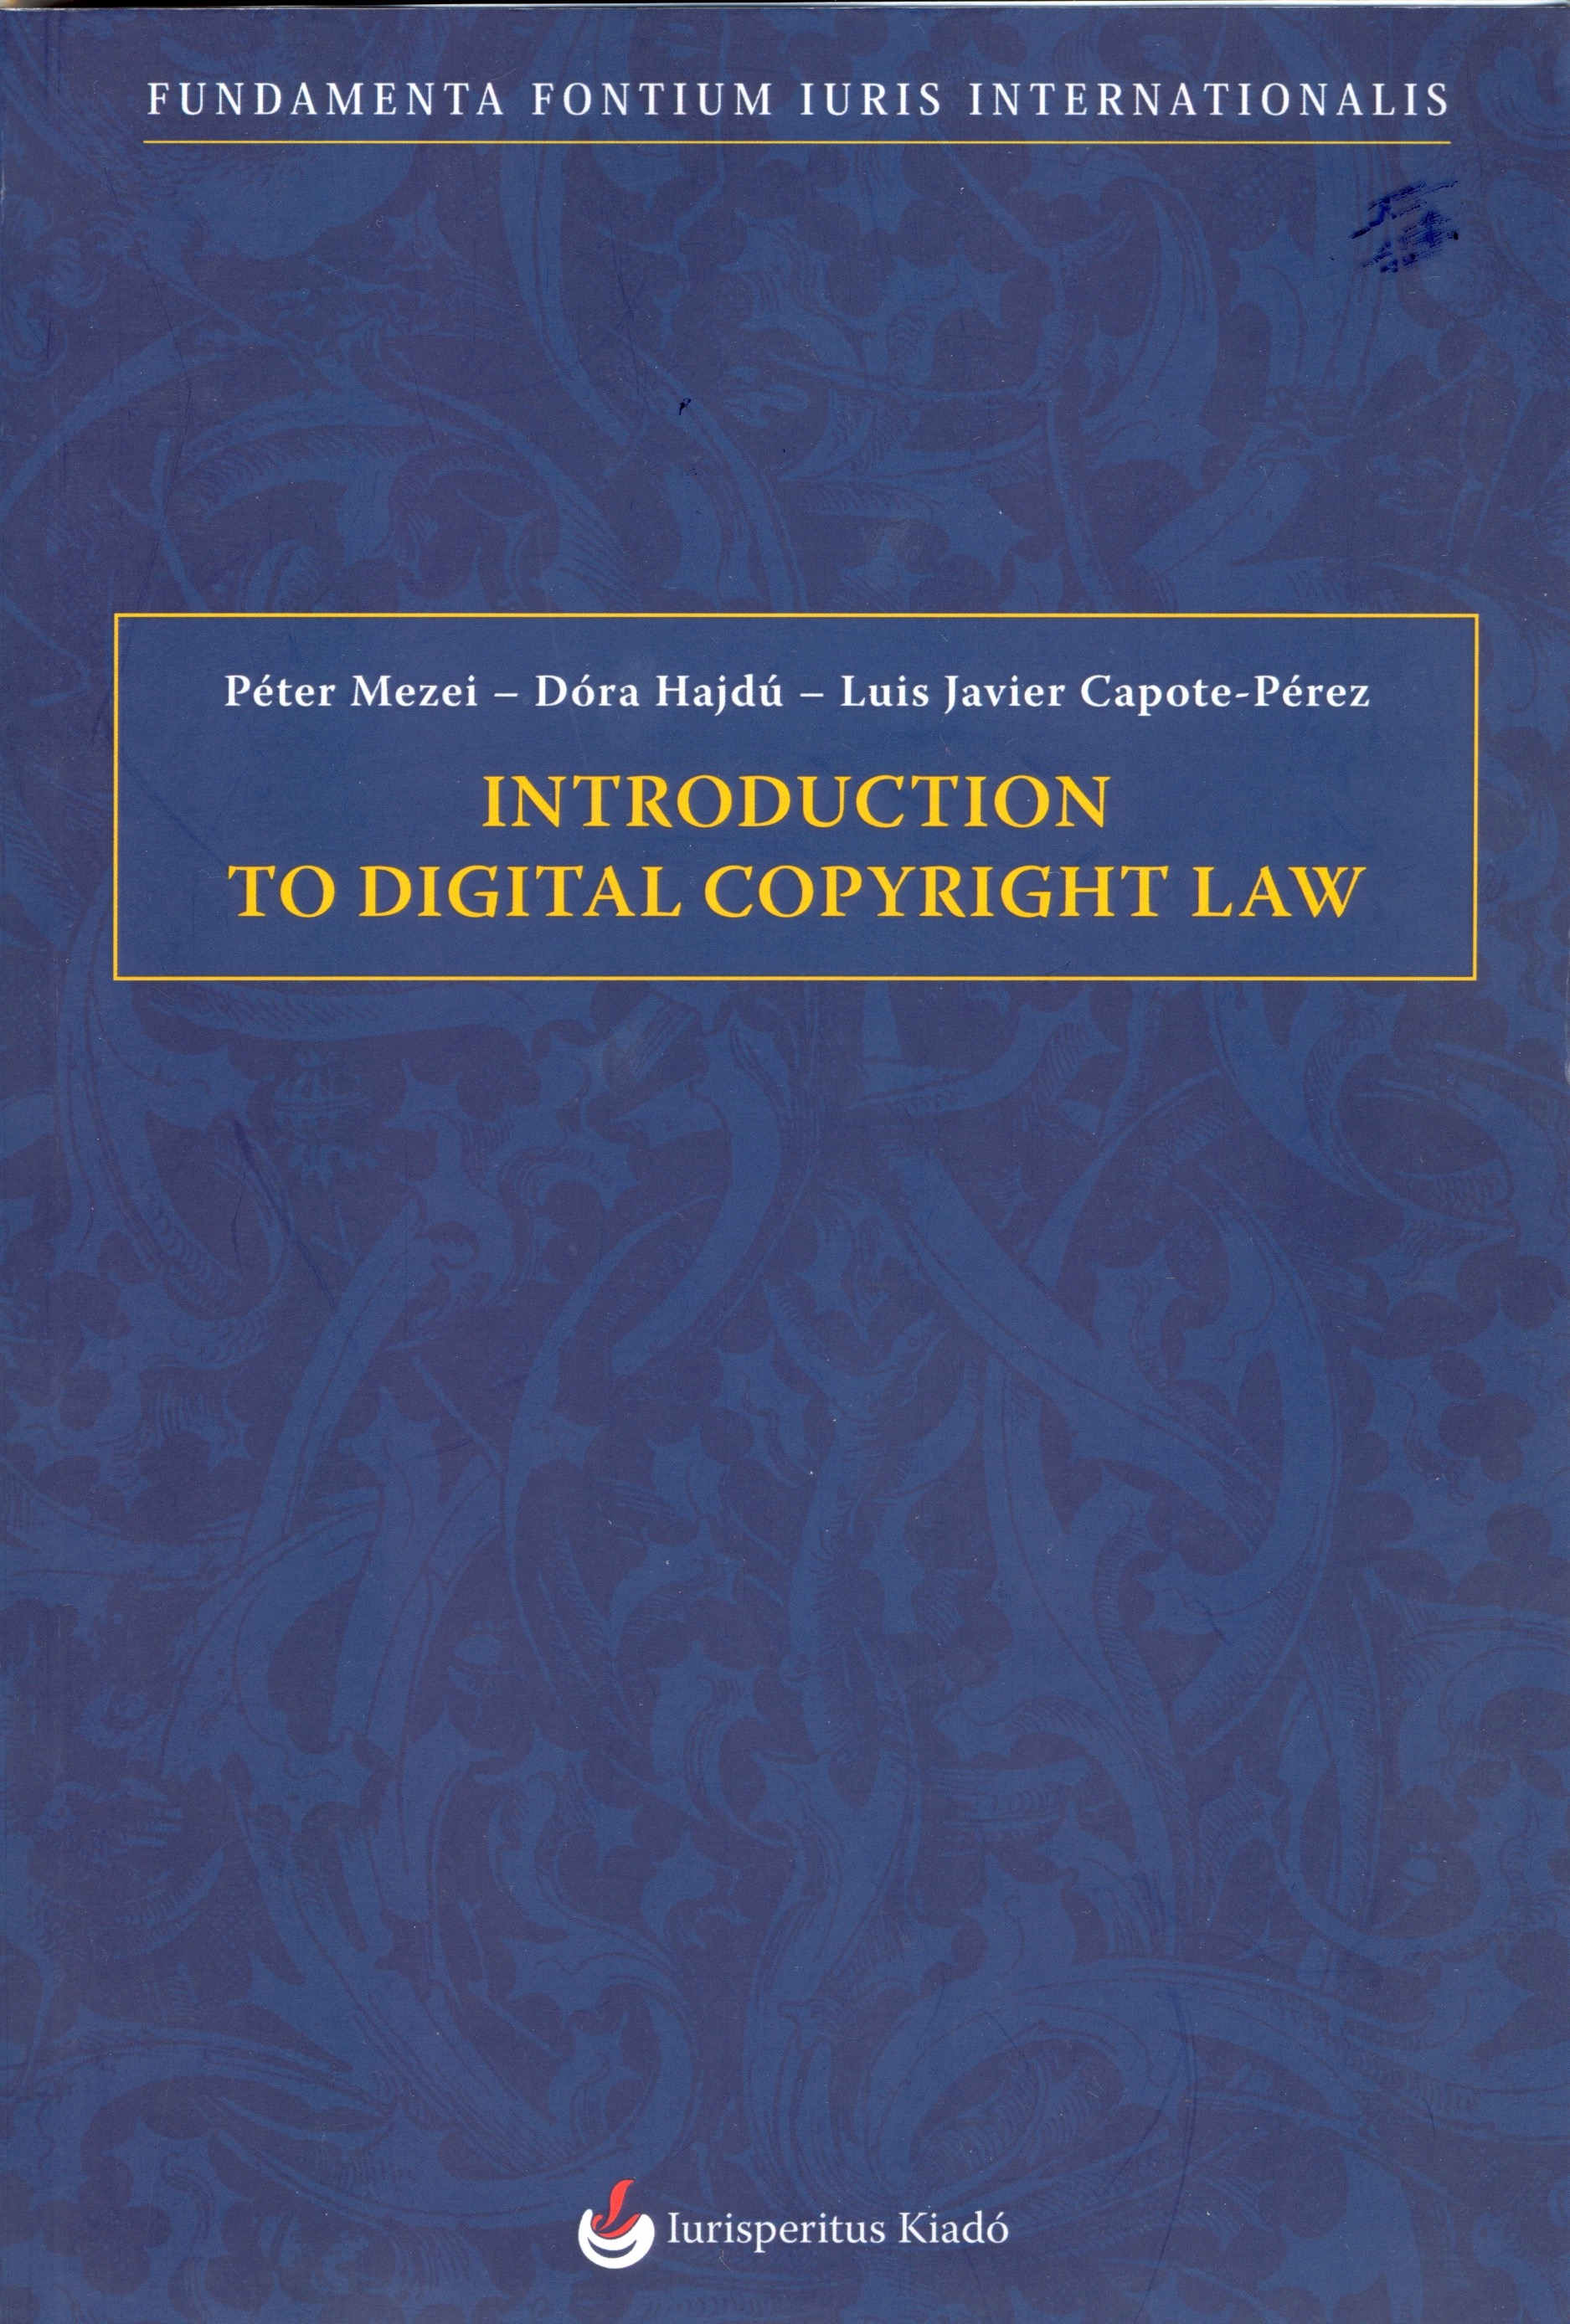 Introduction to Digital Copyright Law